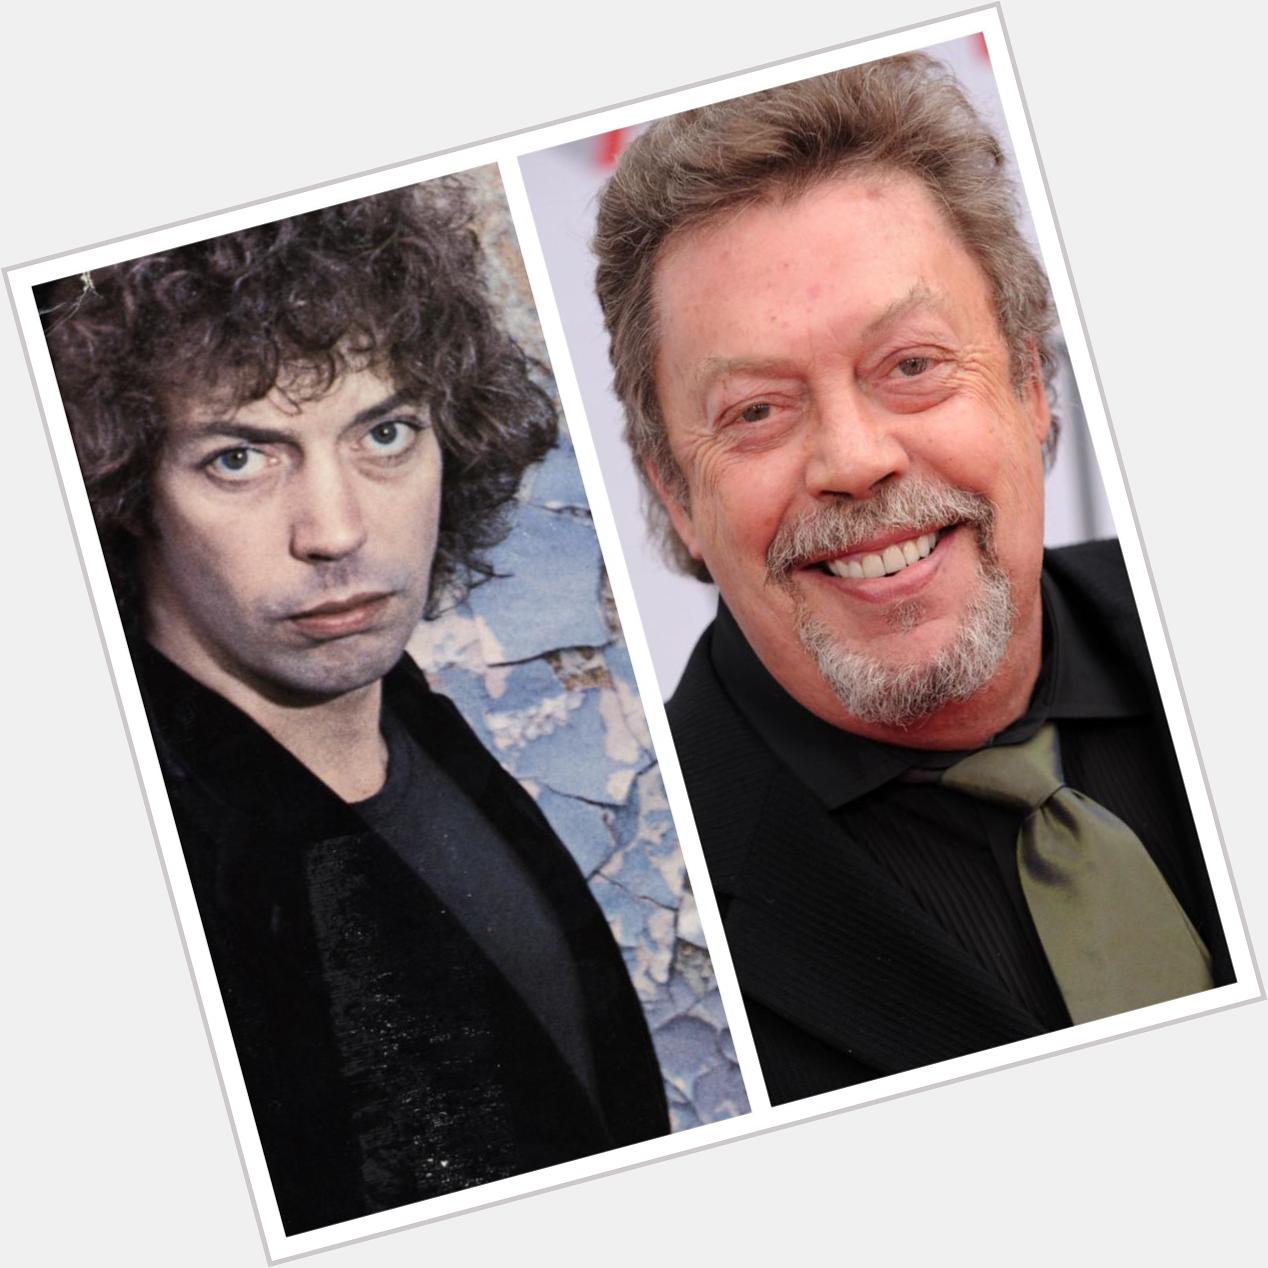 Tim Curry: One of the greatest inspirations of my life. Always captivating & entertaining. Happy 69th Birthday, sir! 